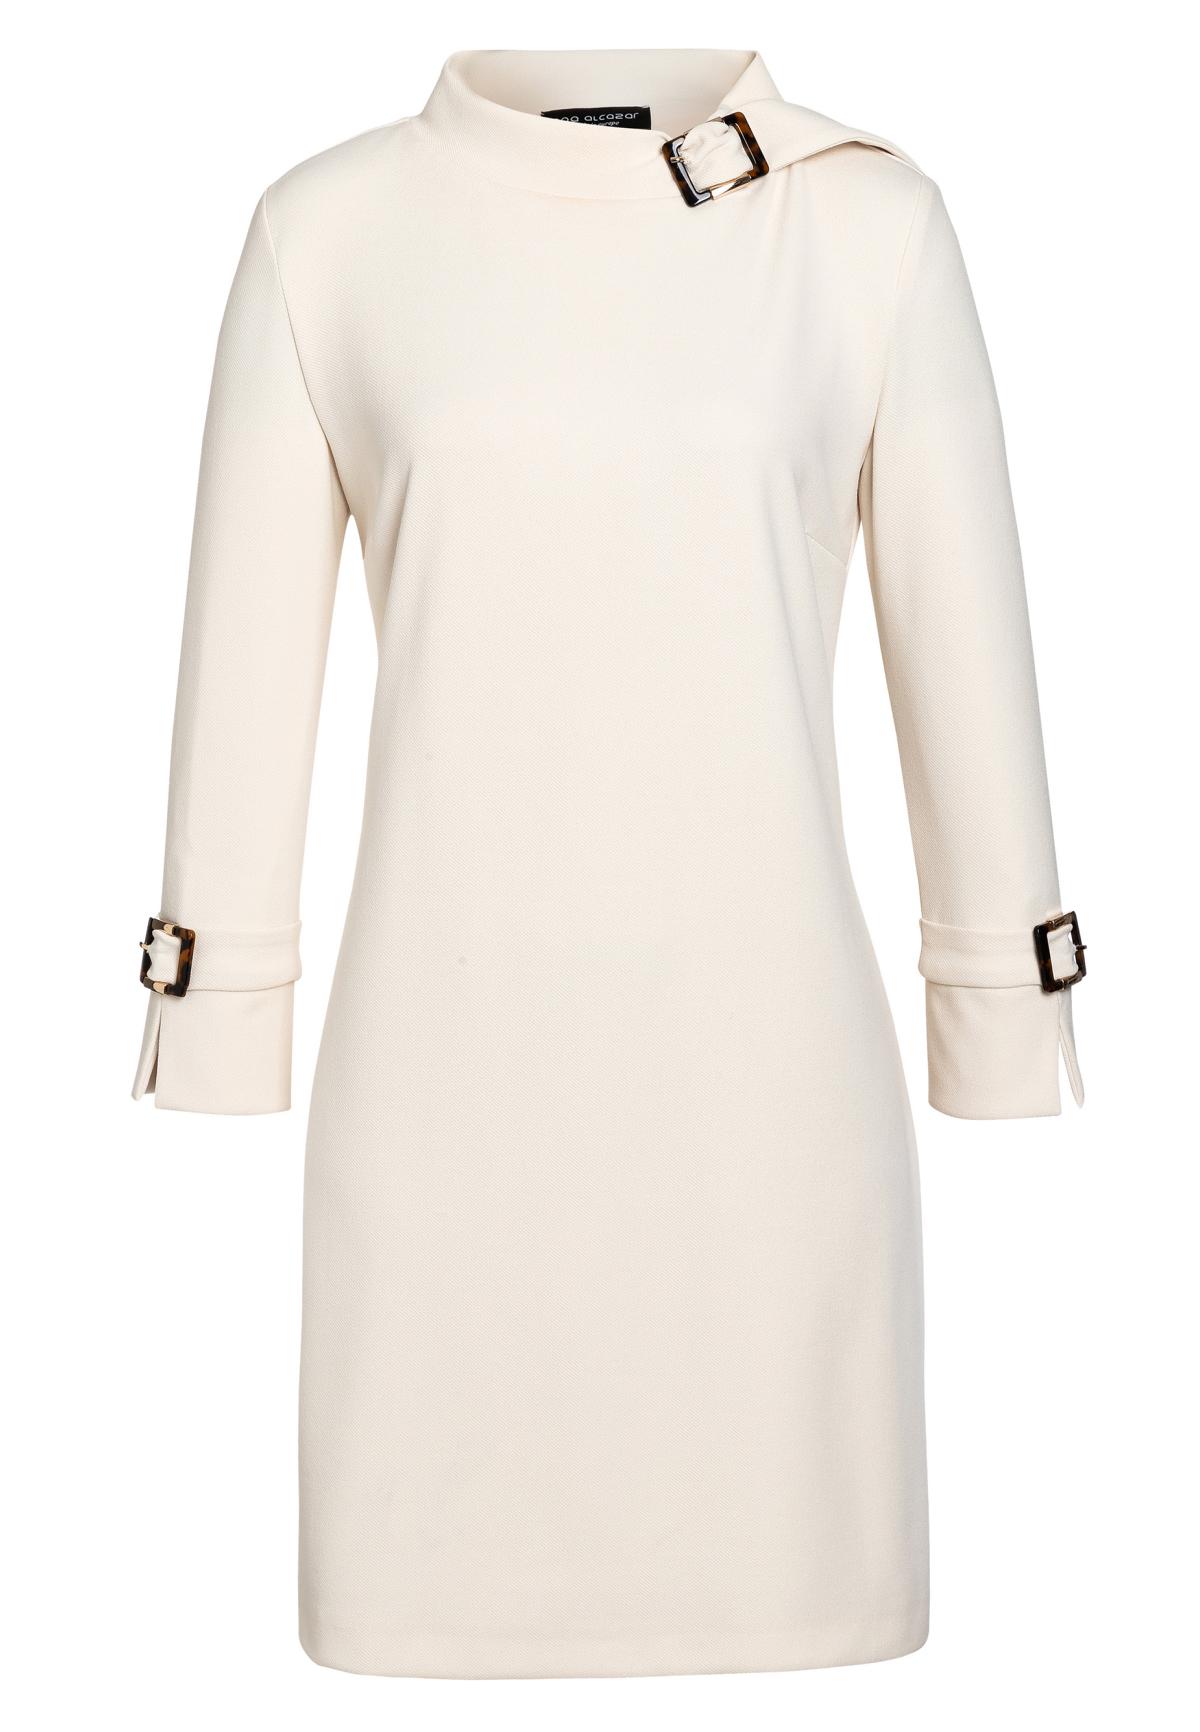 Sixties Dress Basmi In Offwhite With Stand Up Collar And Buckle Ana Alcazar